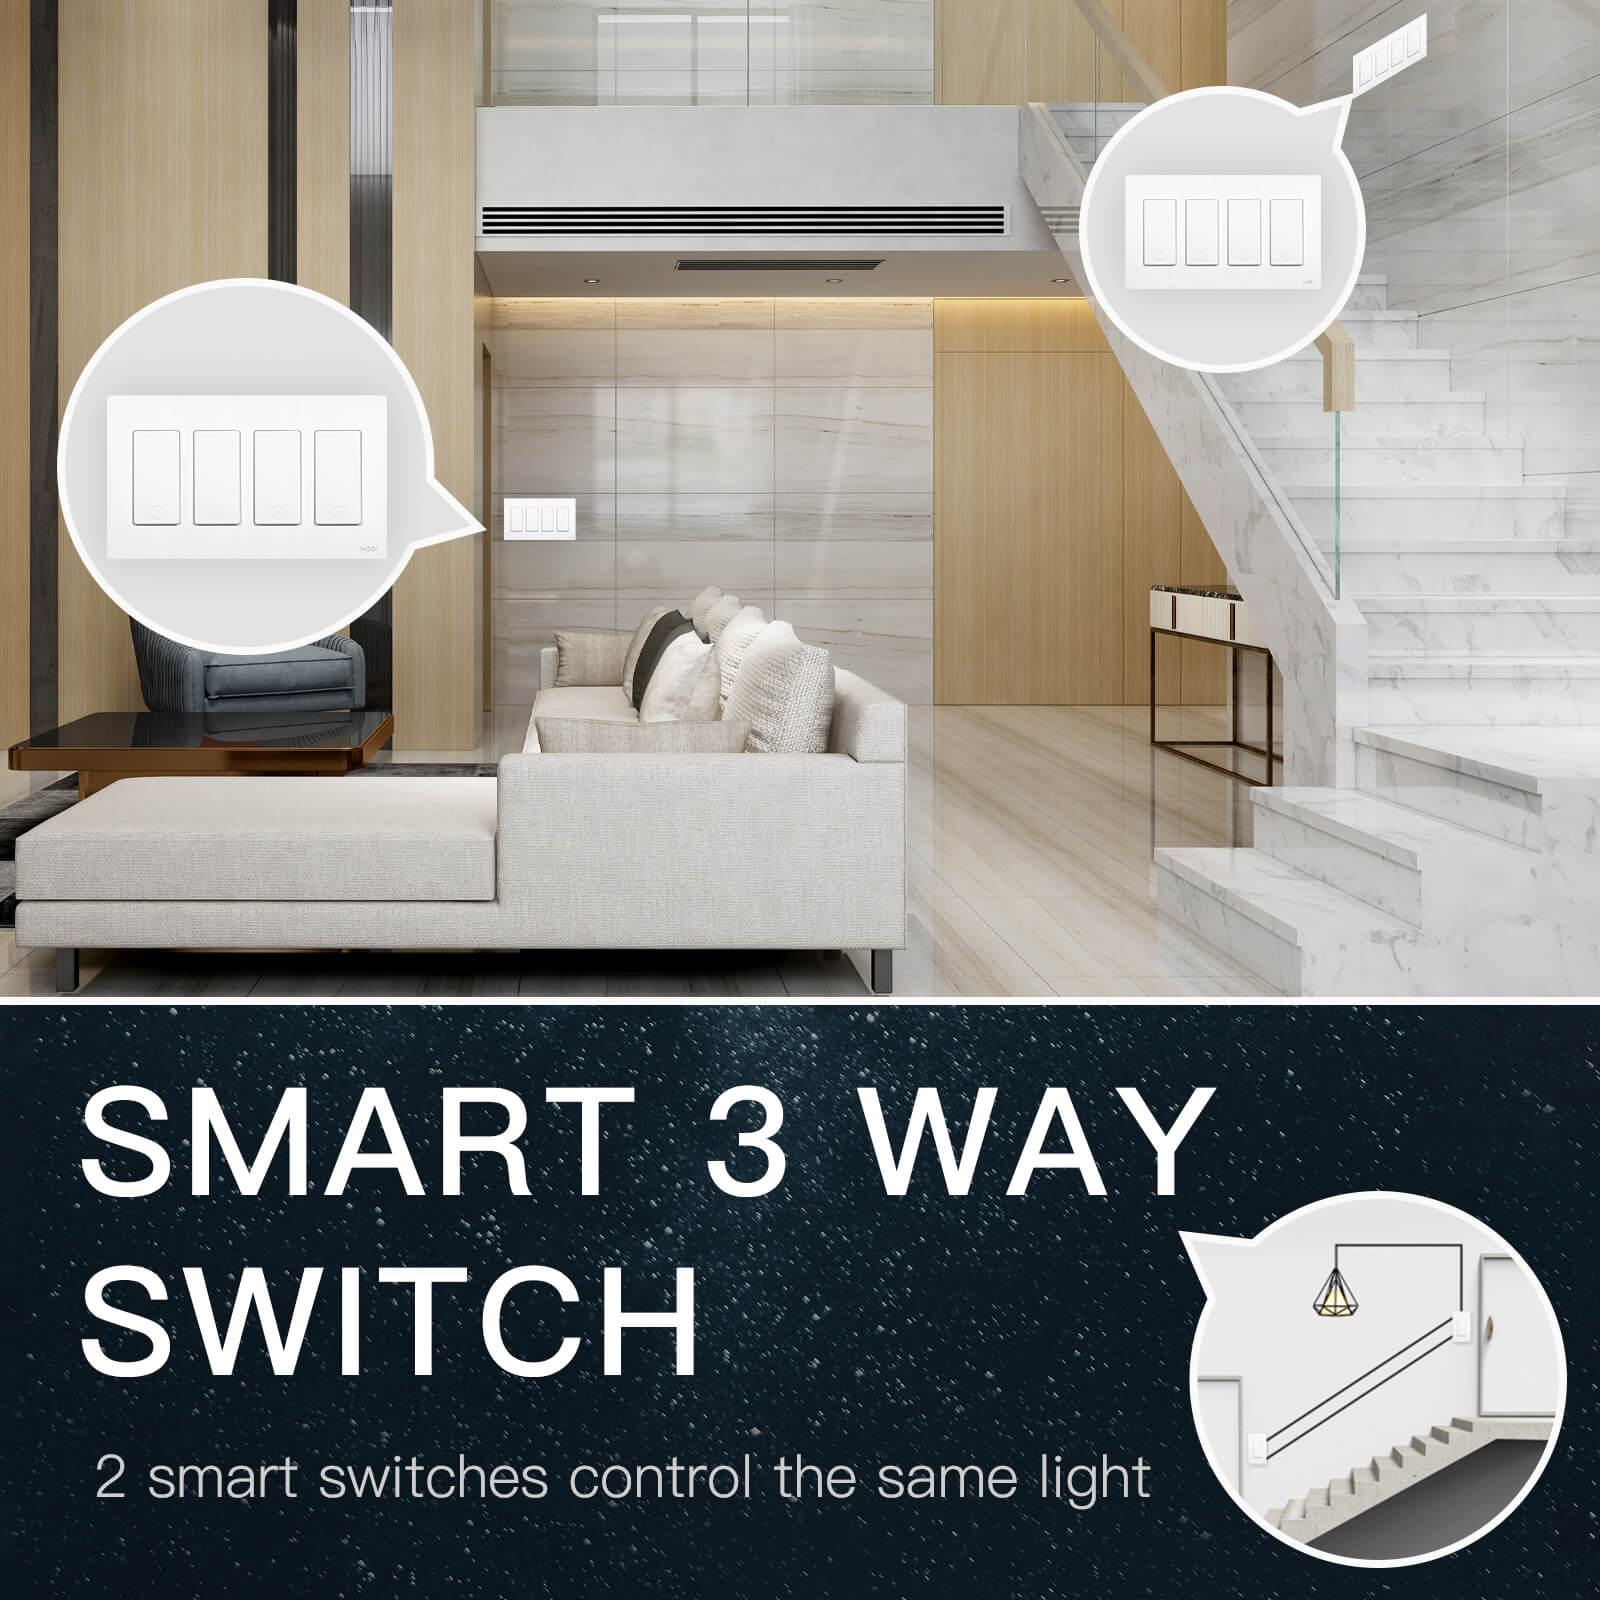 MOES Star Ring 2nd Generation Smart WiFi 3 Way/Single Pole Push Button Light Switch 1/2/3/4 Gang - MOES